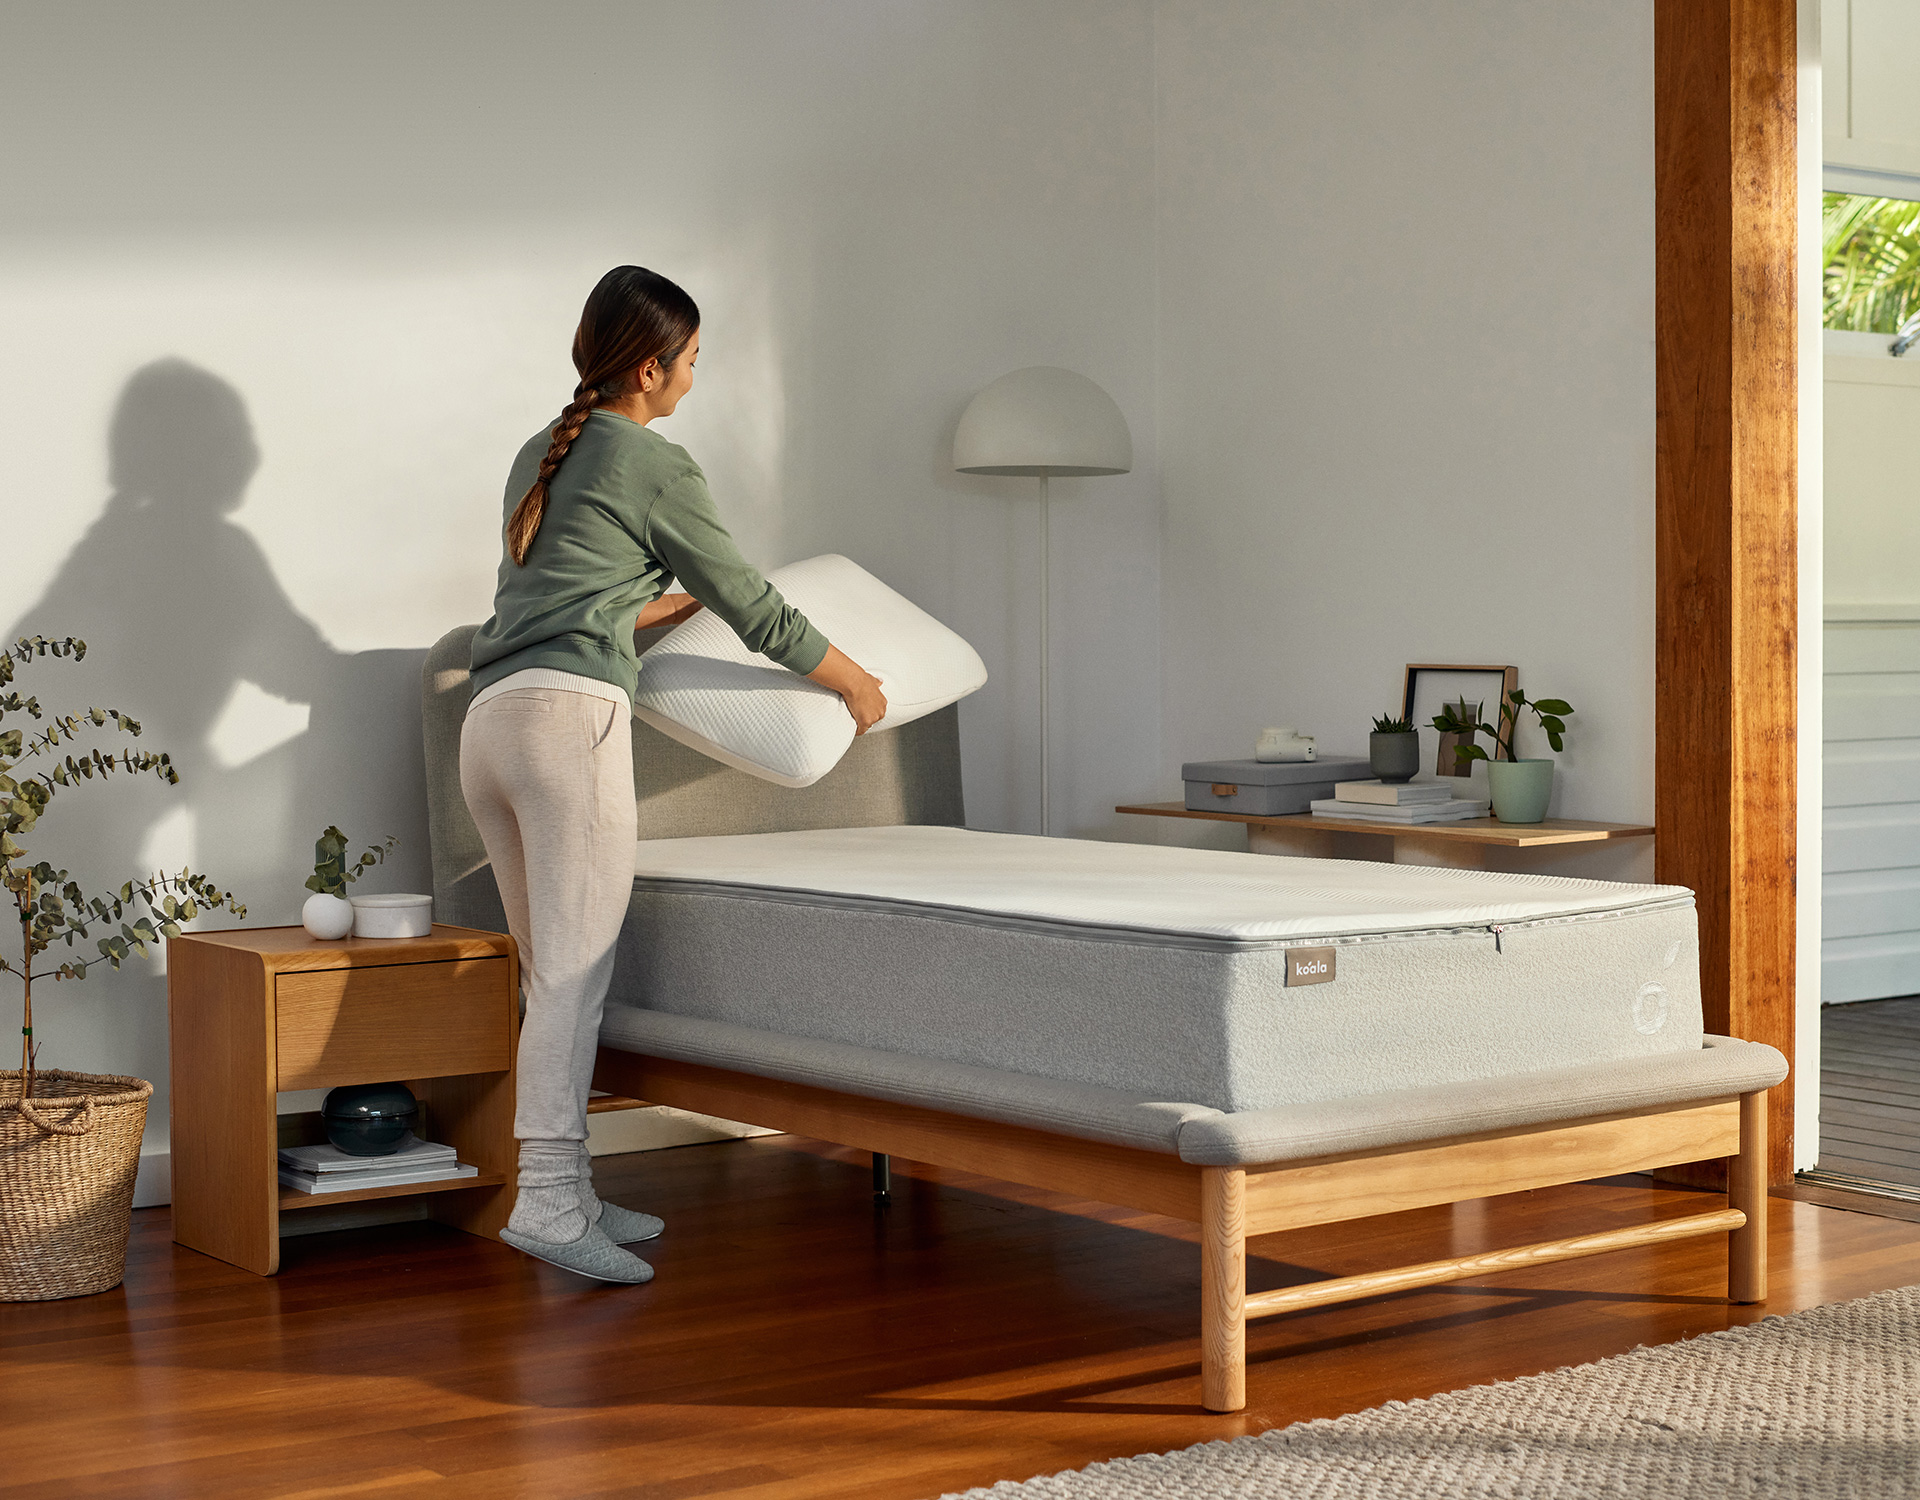 A young woman prepares to enjoy a great night’s sleep on her Koala Kloudcell mattress